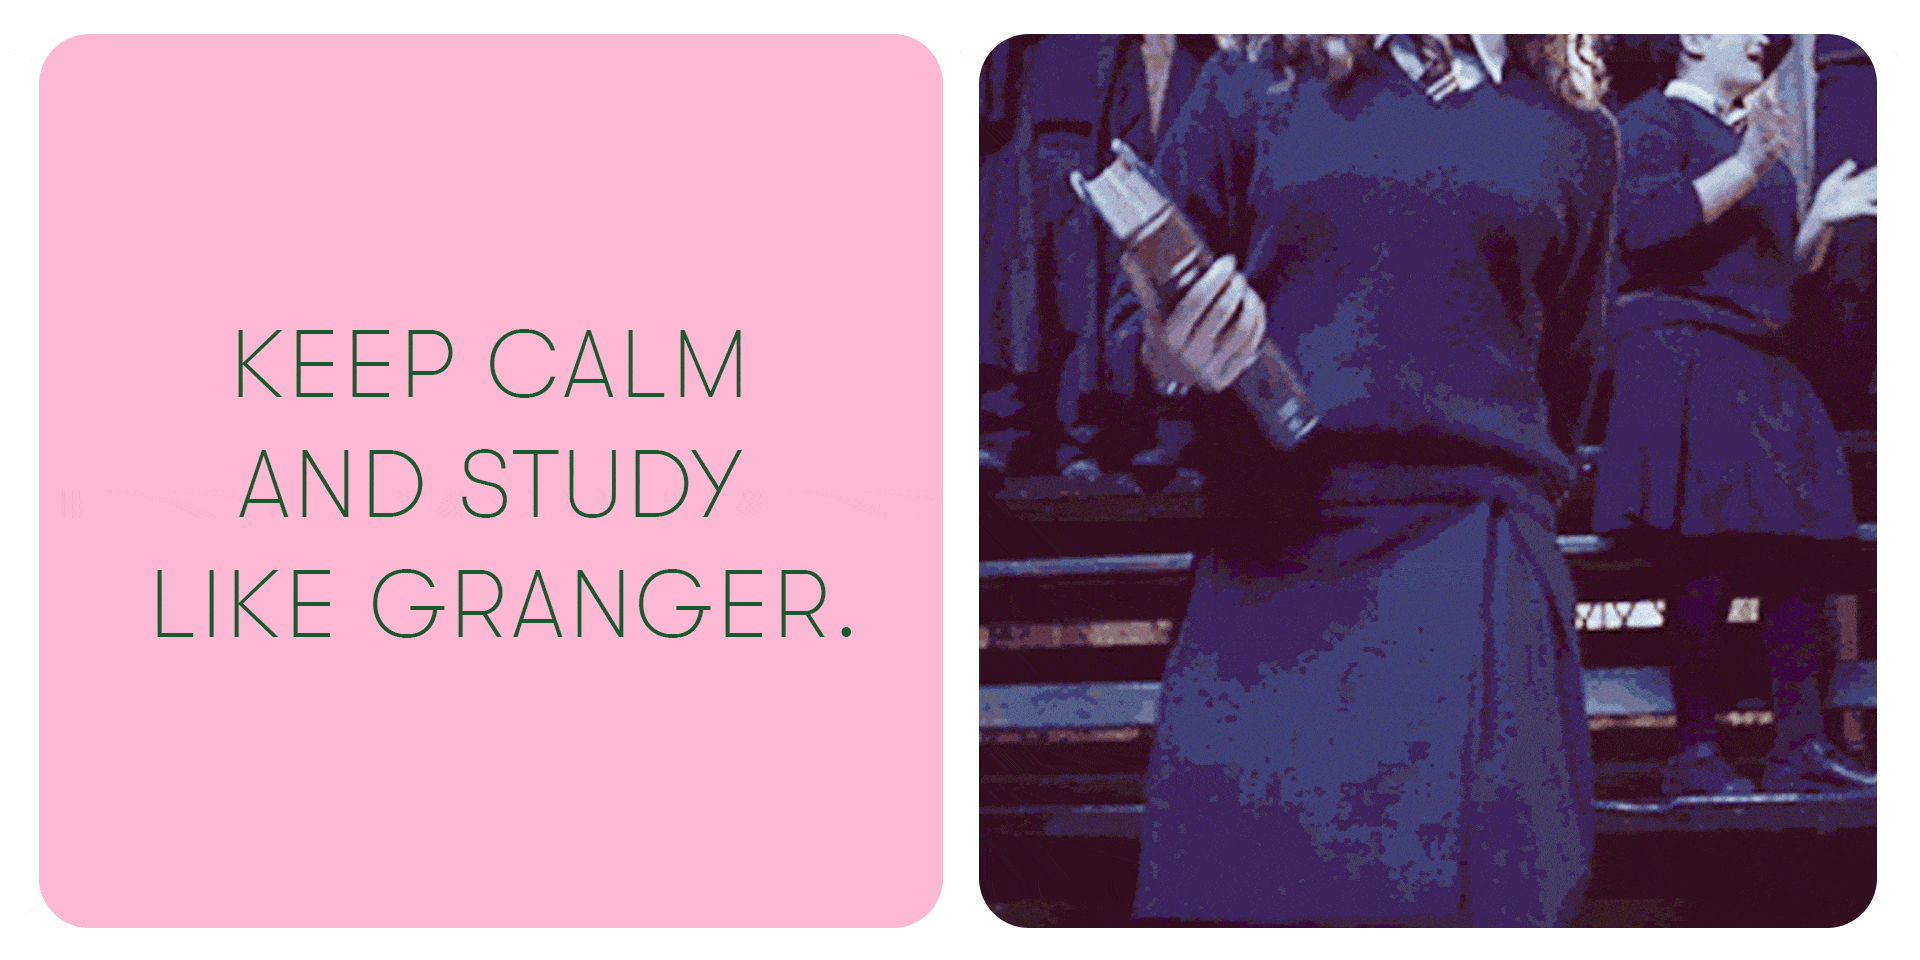 keep calm and study for exams wallpaper